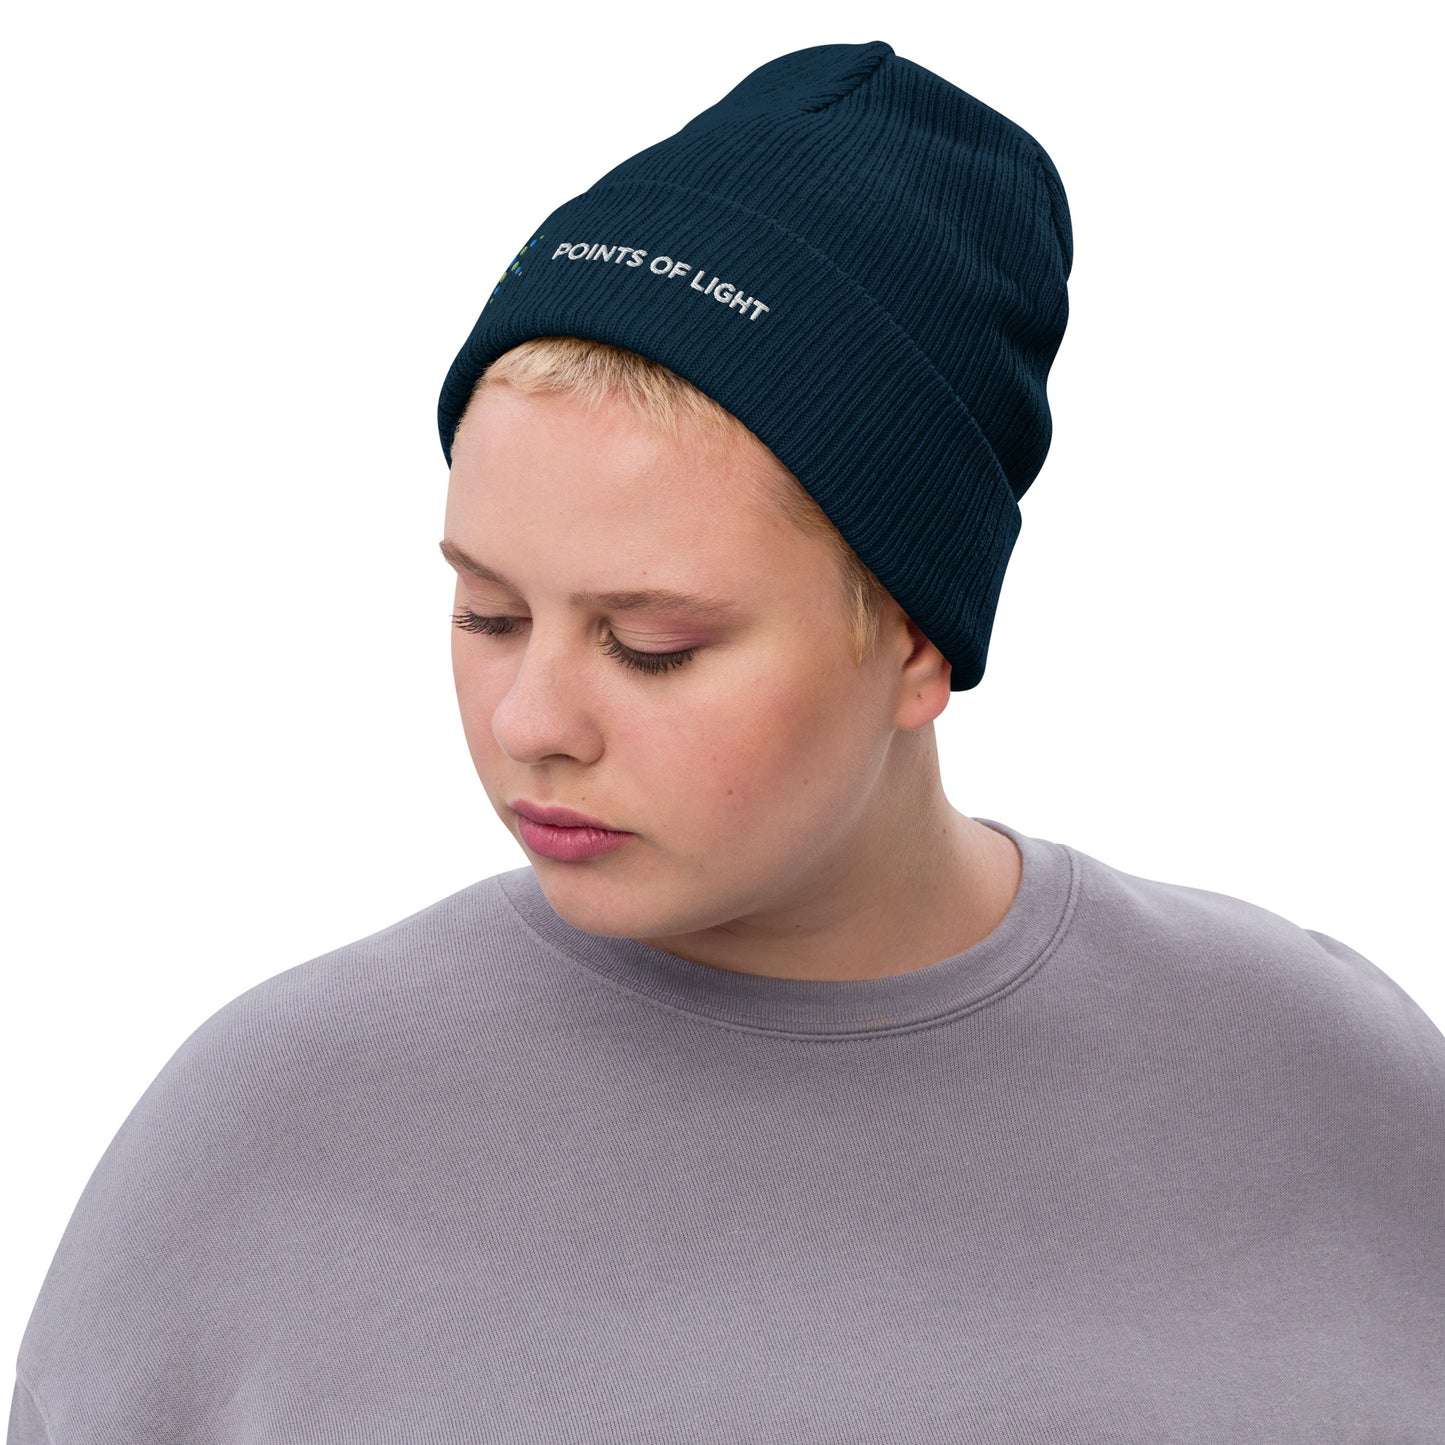 Points of Light knit beanie